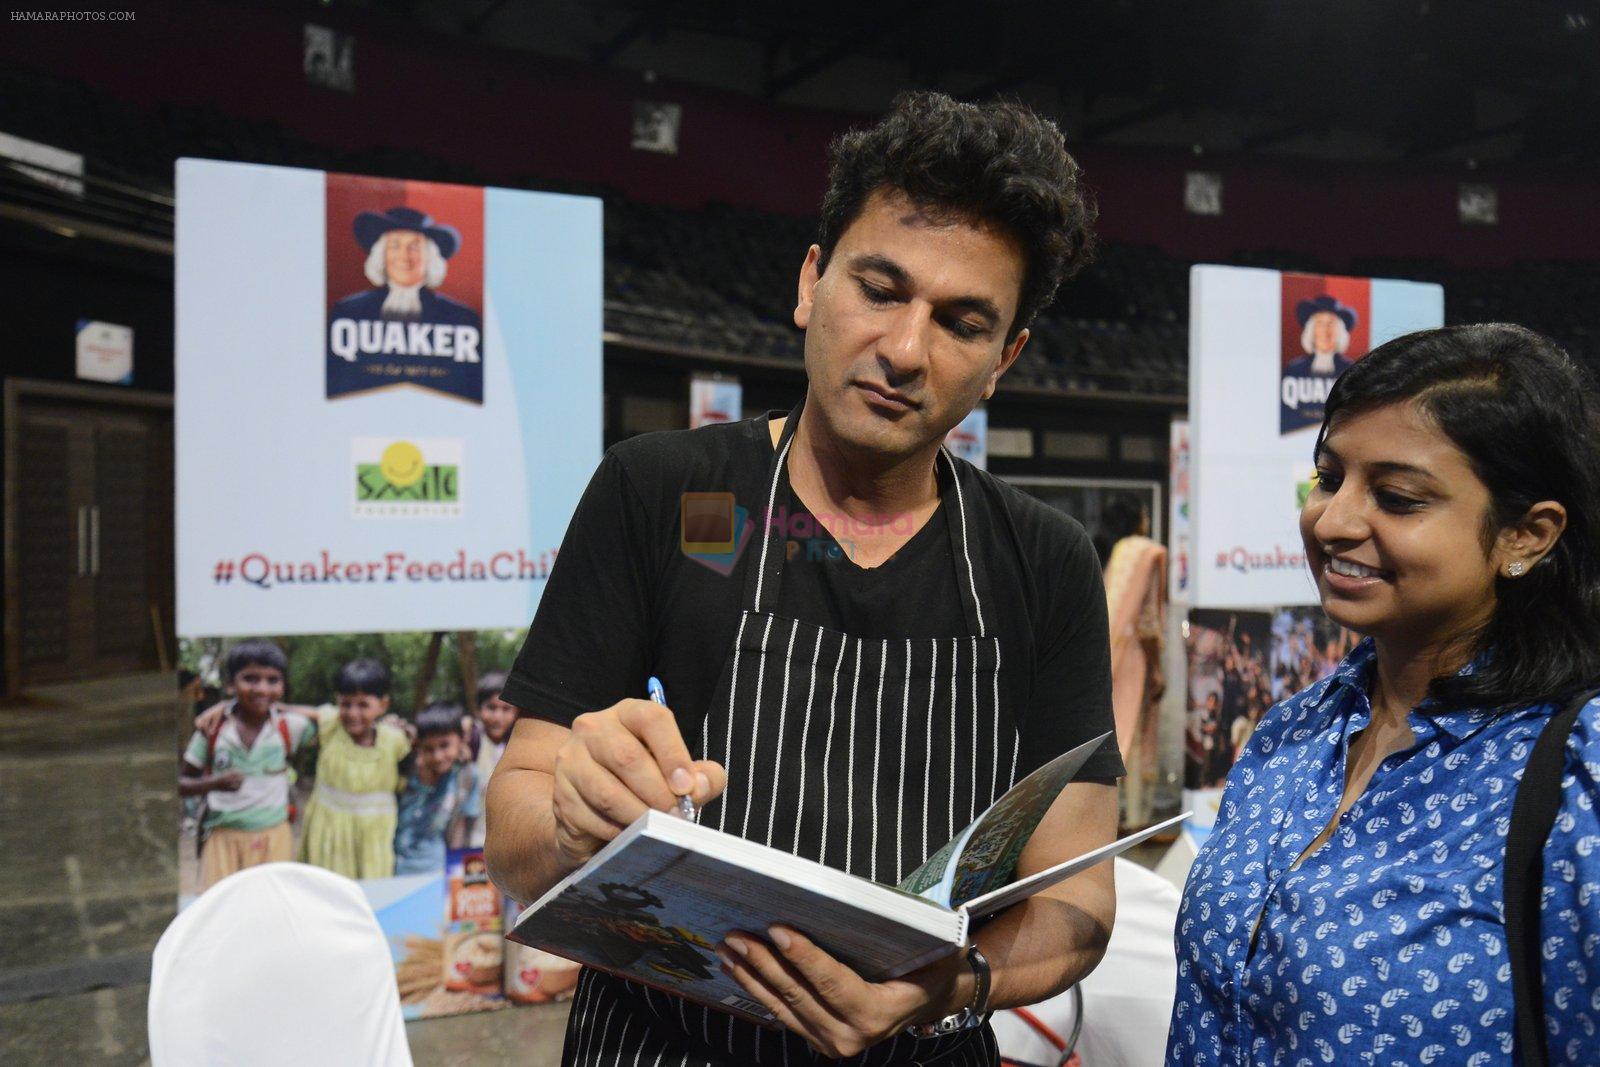 Vikas Khanna for world food day event by smile foundation at Quaker on 16th Oct 2016